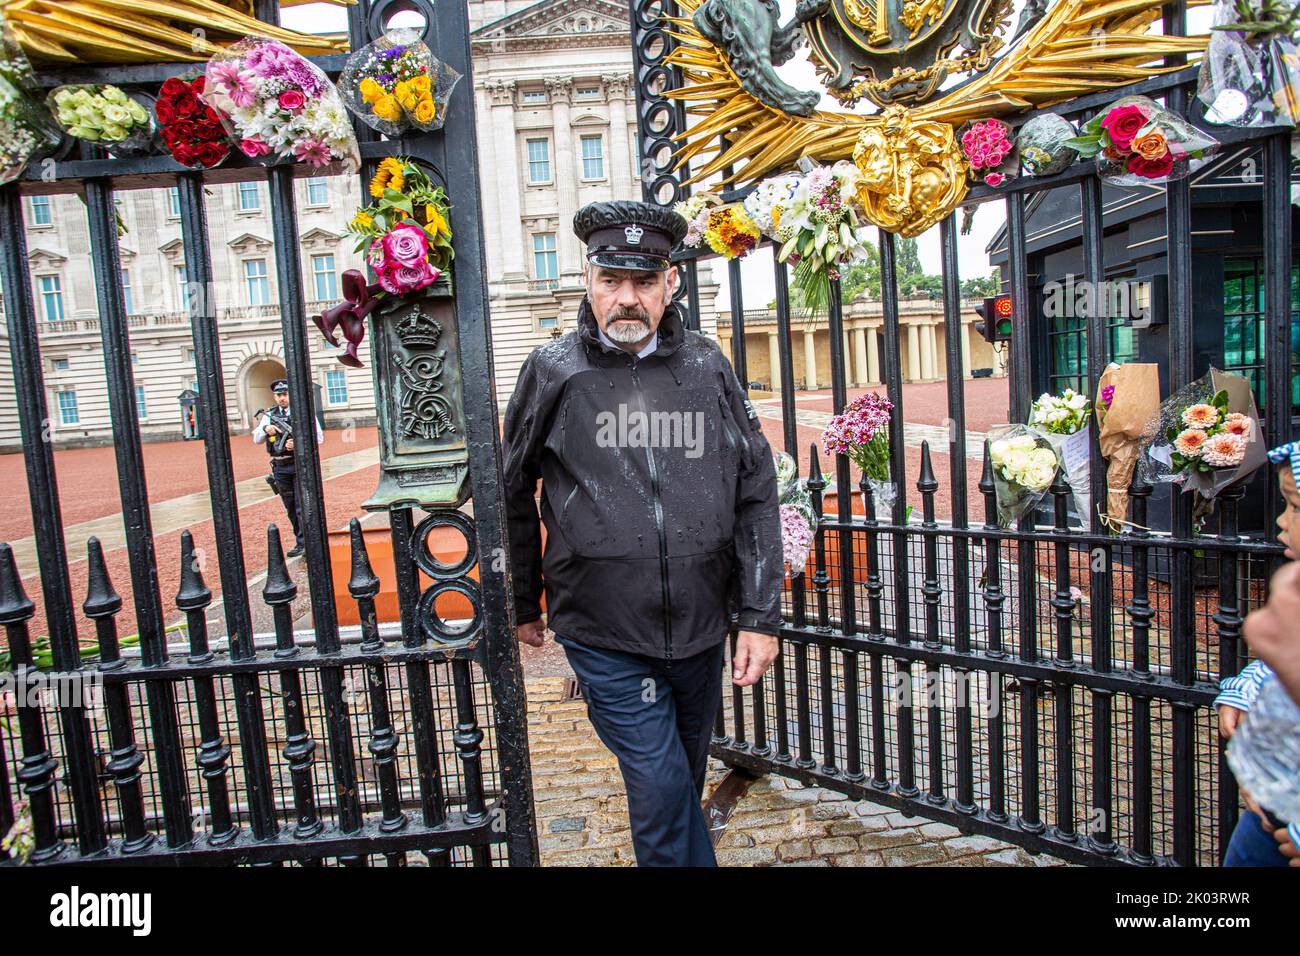 London UK. 9 September 2022. Buckingham Palace gate security opens up to allow entrance to Palace .Floral tributes outside Buckingham palace to HM Queen Elizabeth II, who died aged 96 years in Balmoral Scotland as the longest serving British monarch and will be succedded by her son King Charles III .Photo Horst A. Friedrichs Alamy Live News Stock Photo